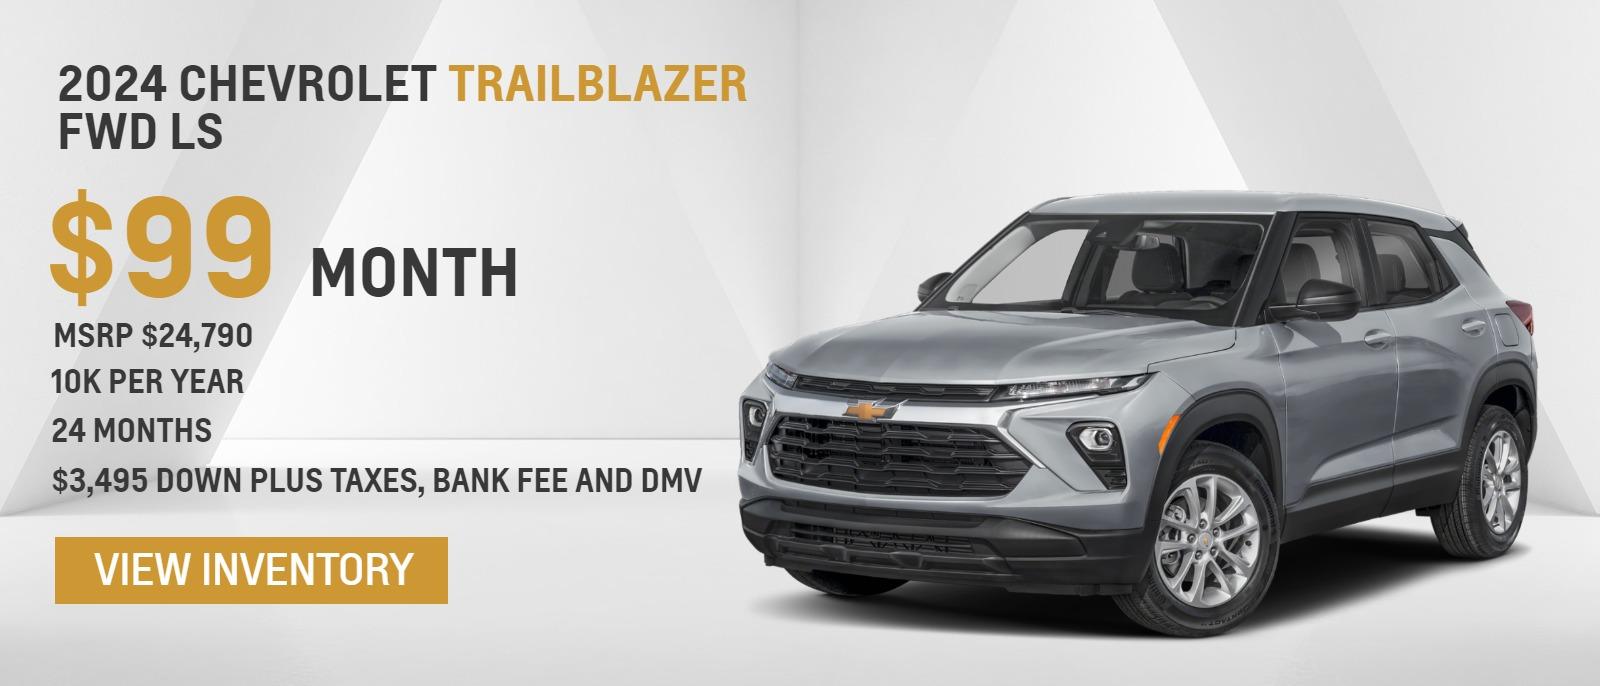 2024 Chevrolet Trailblazer FWD LS
MSRP $24,790.
10k per year
24 months
$99. month
$3,495 down plus taxes, bank fee and DMV